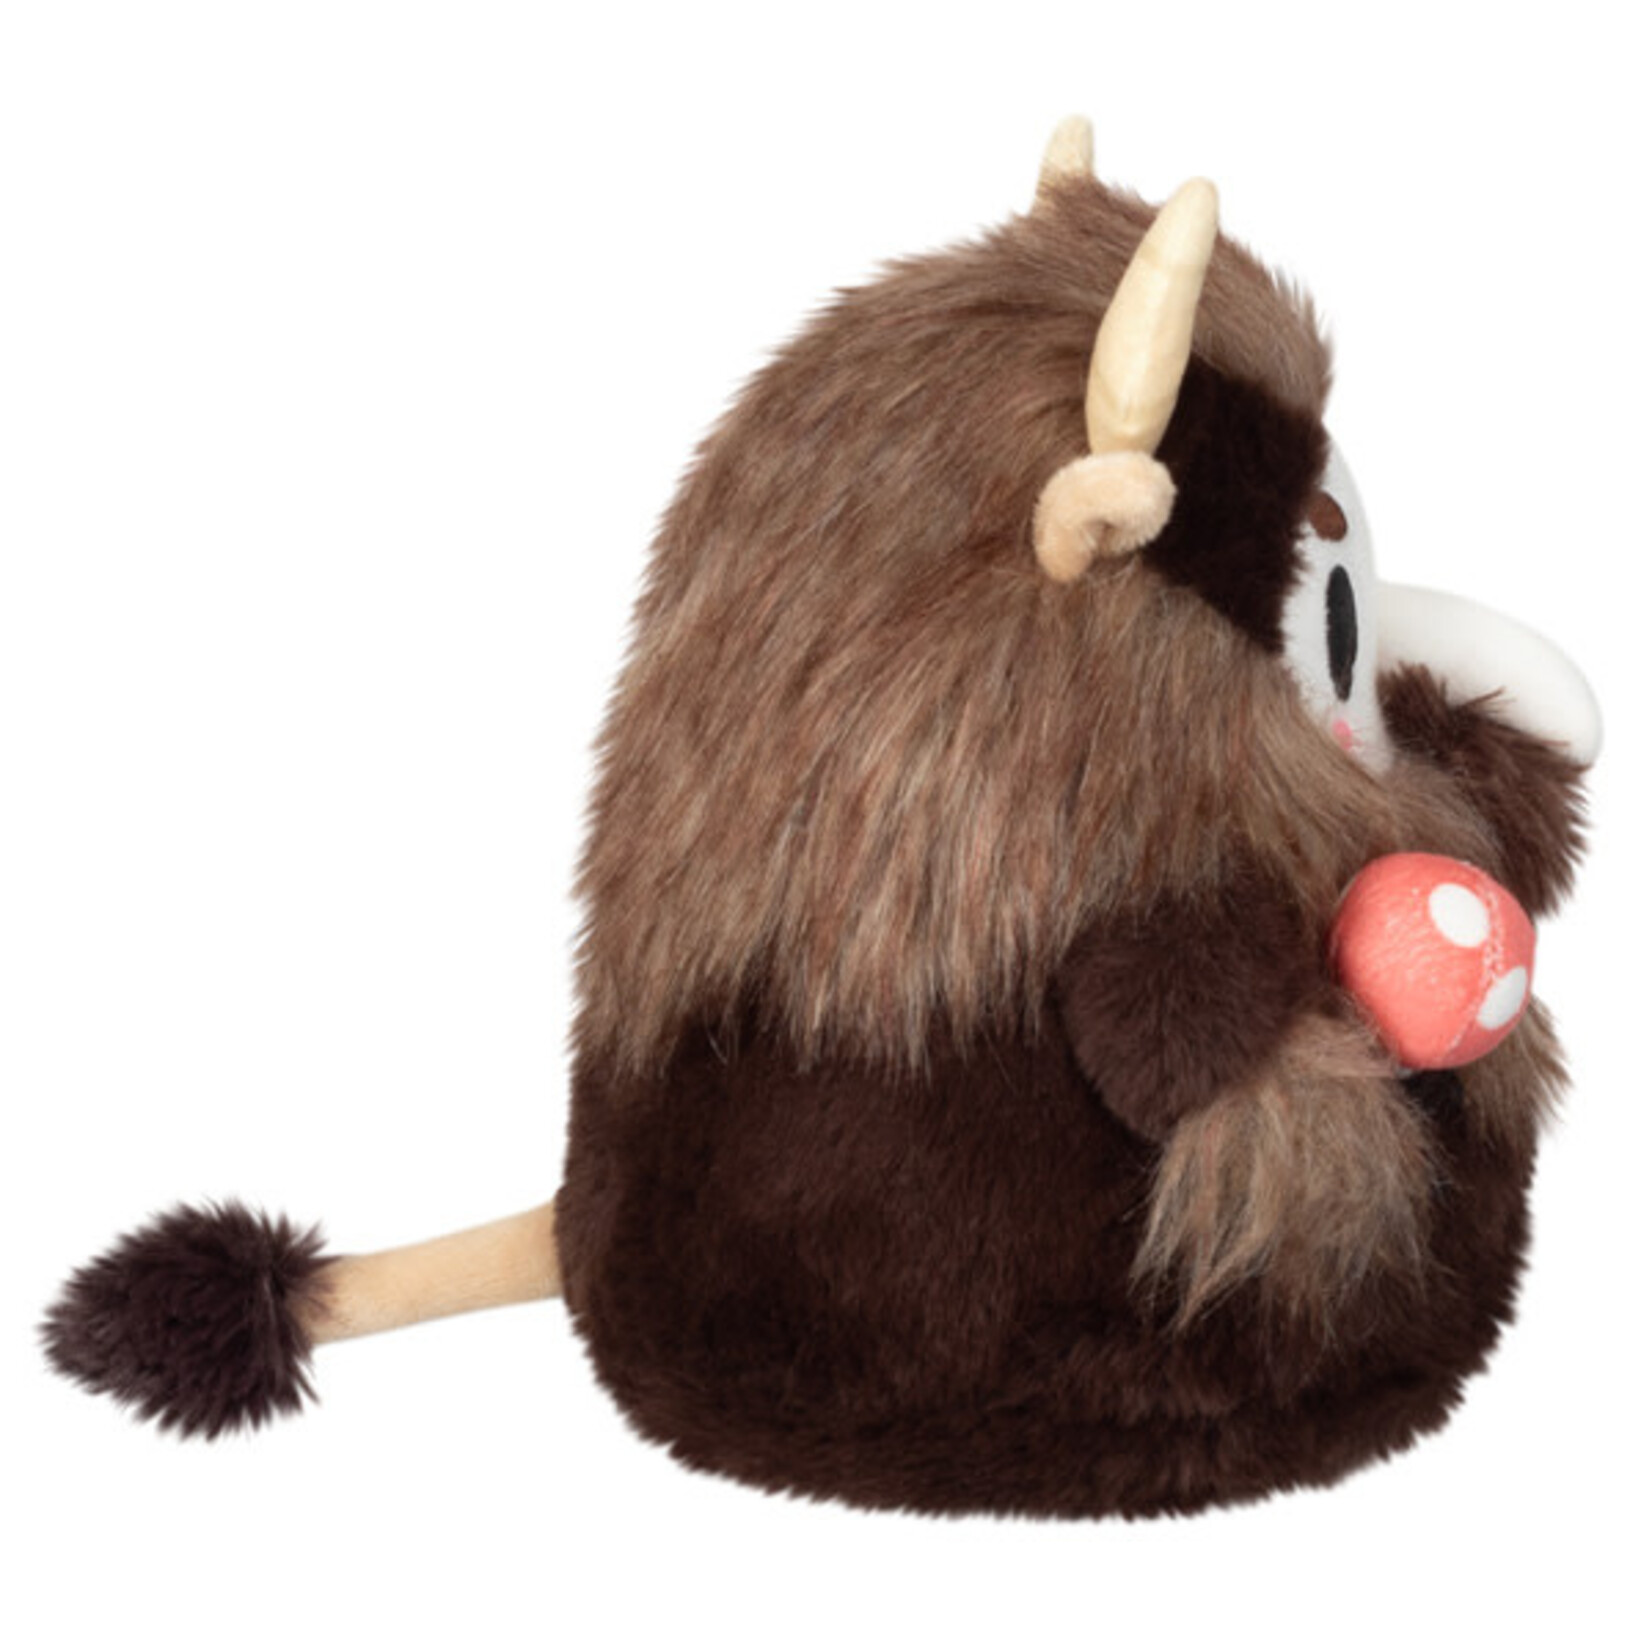 Squishable Alter Ego Beast Plague Doctor Squishable